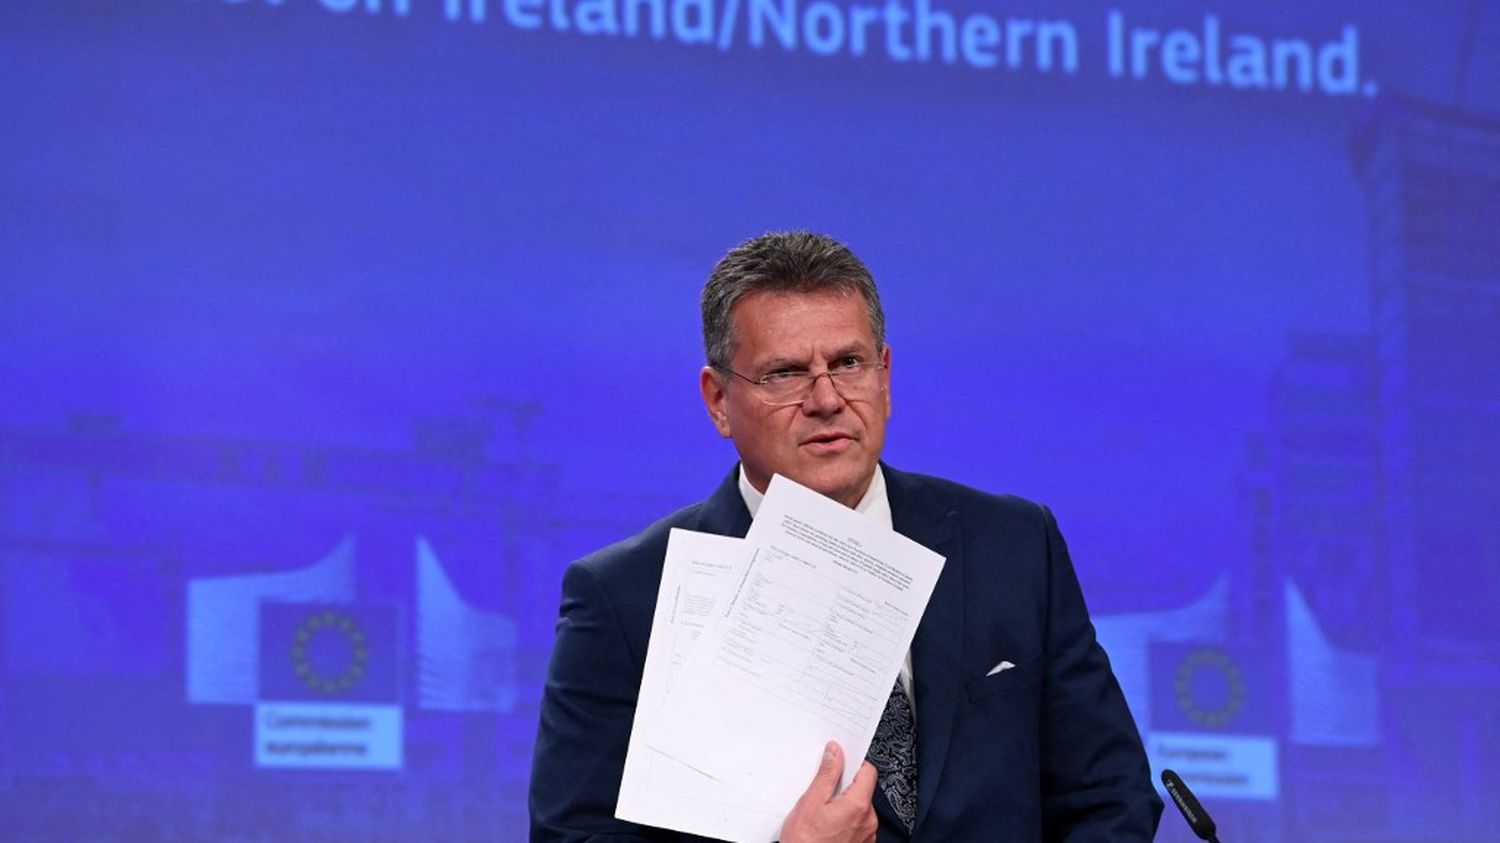 Brexit: Brussels announces new procedures against London, which launched the unilateral revision of the Northern Irish protocol
